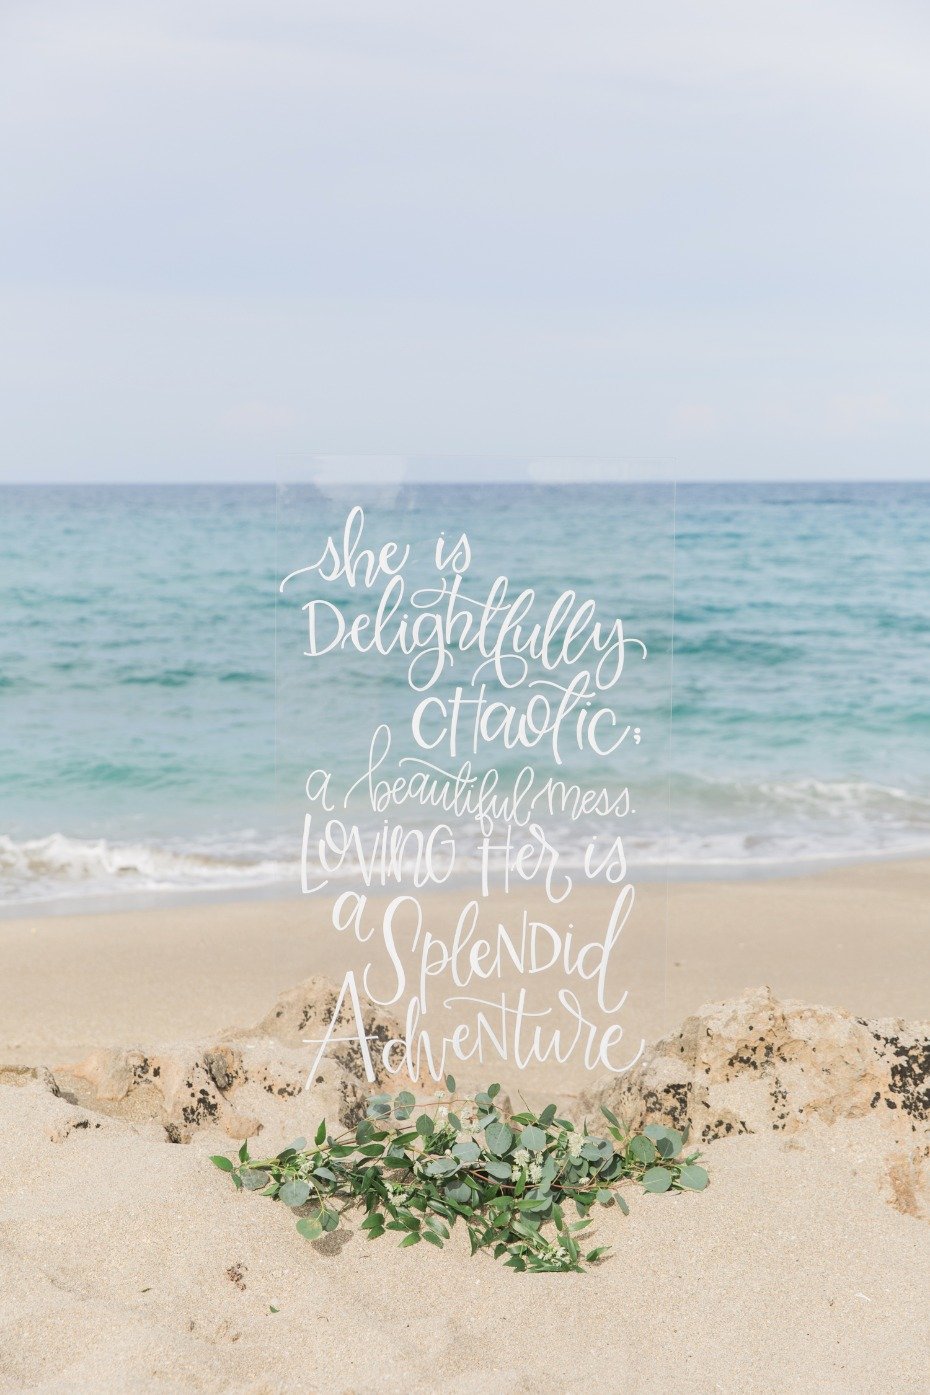 She is delightfully chaotic, a beautiful mess. Loving her is a splendid adventure sign